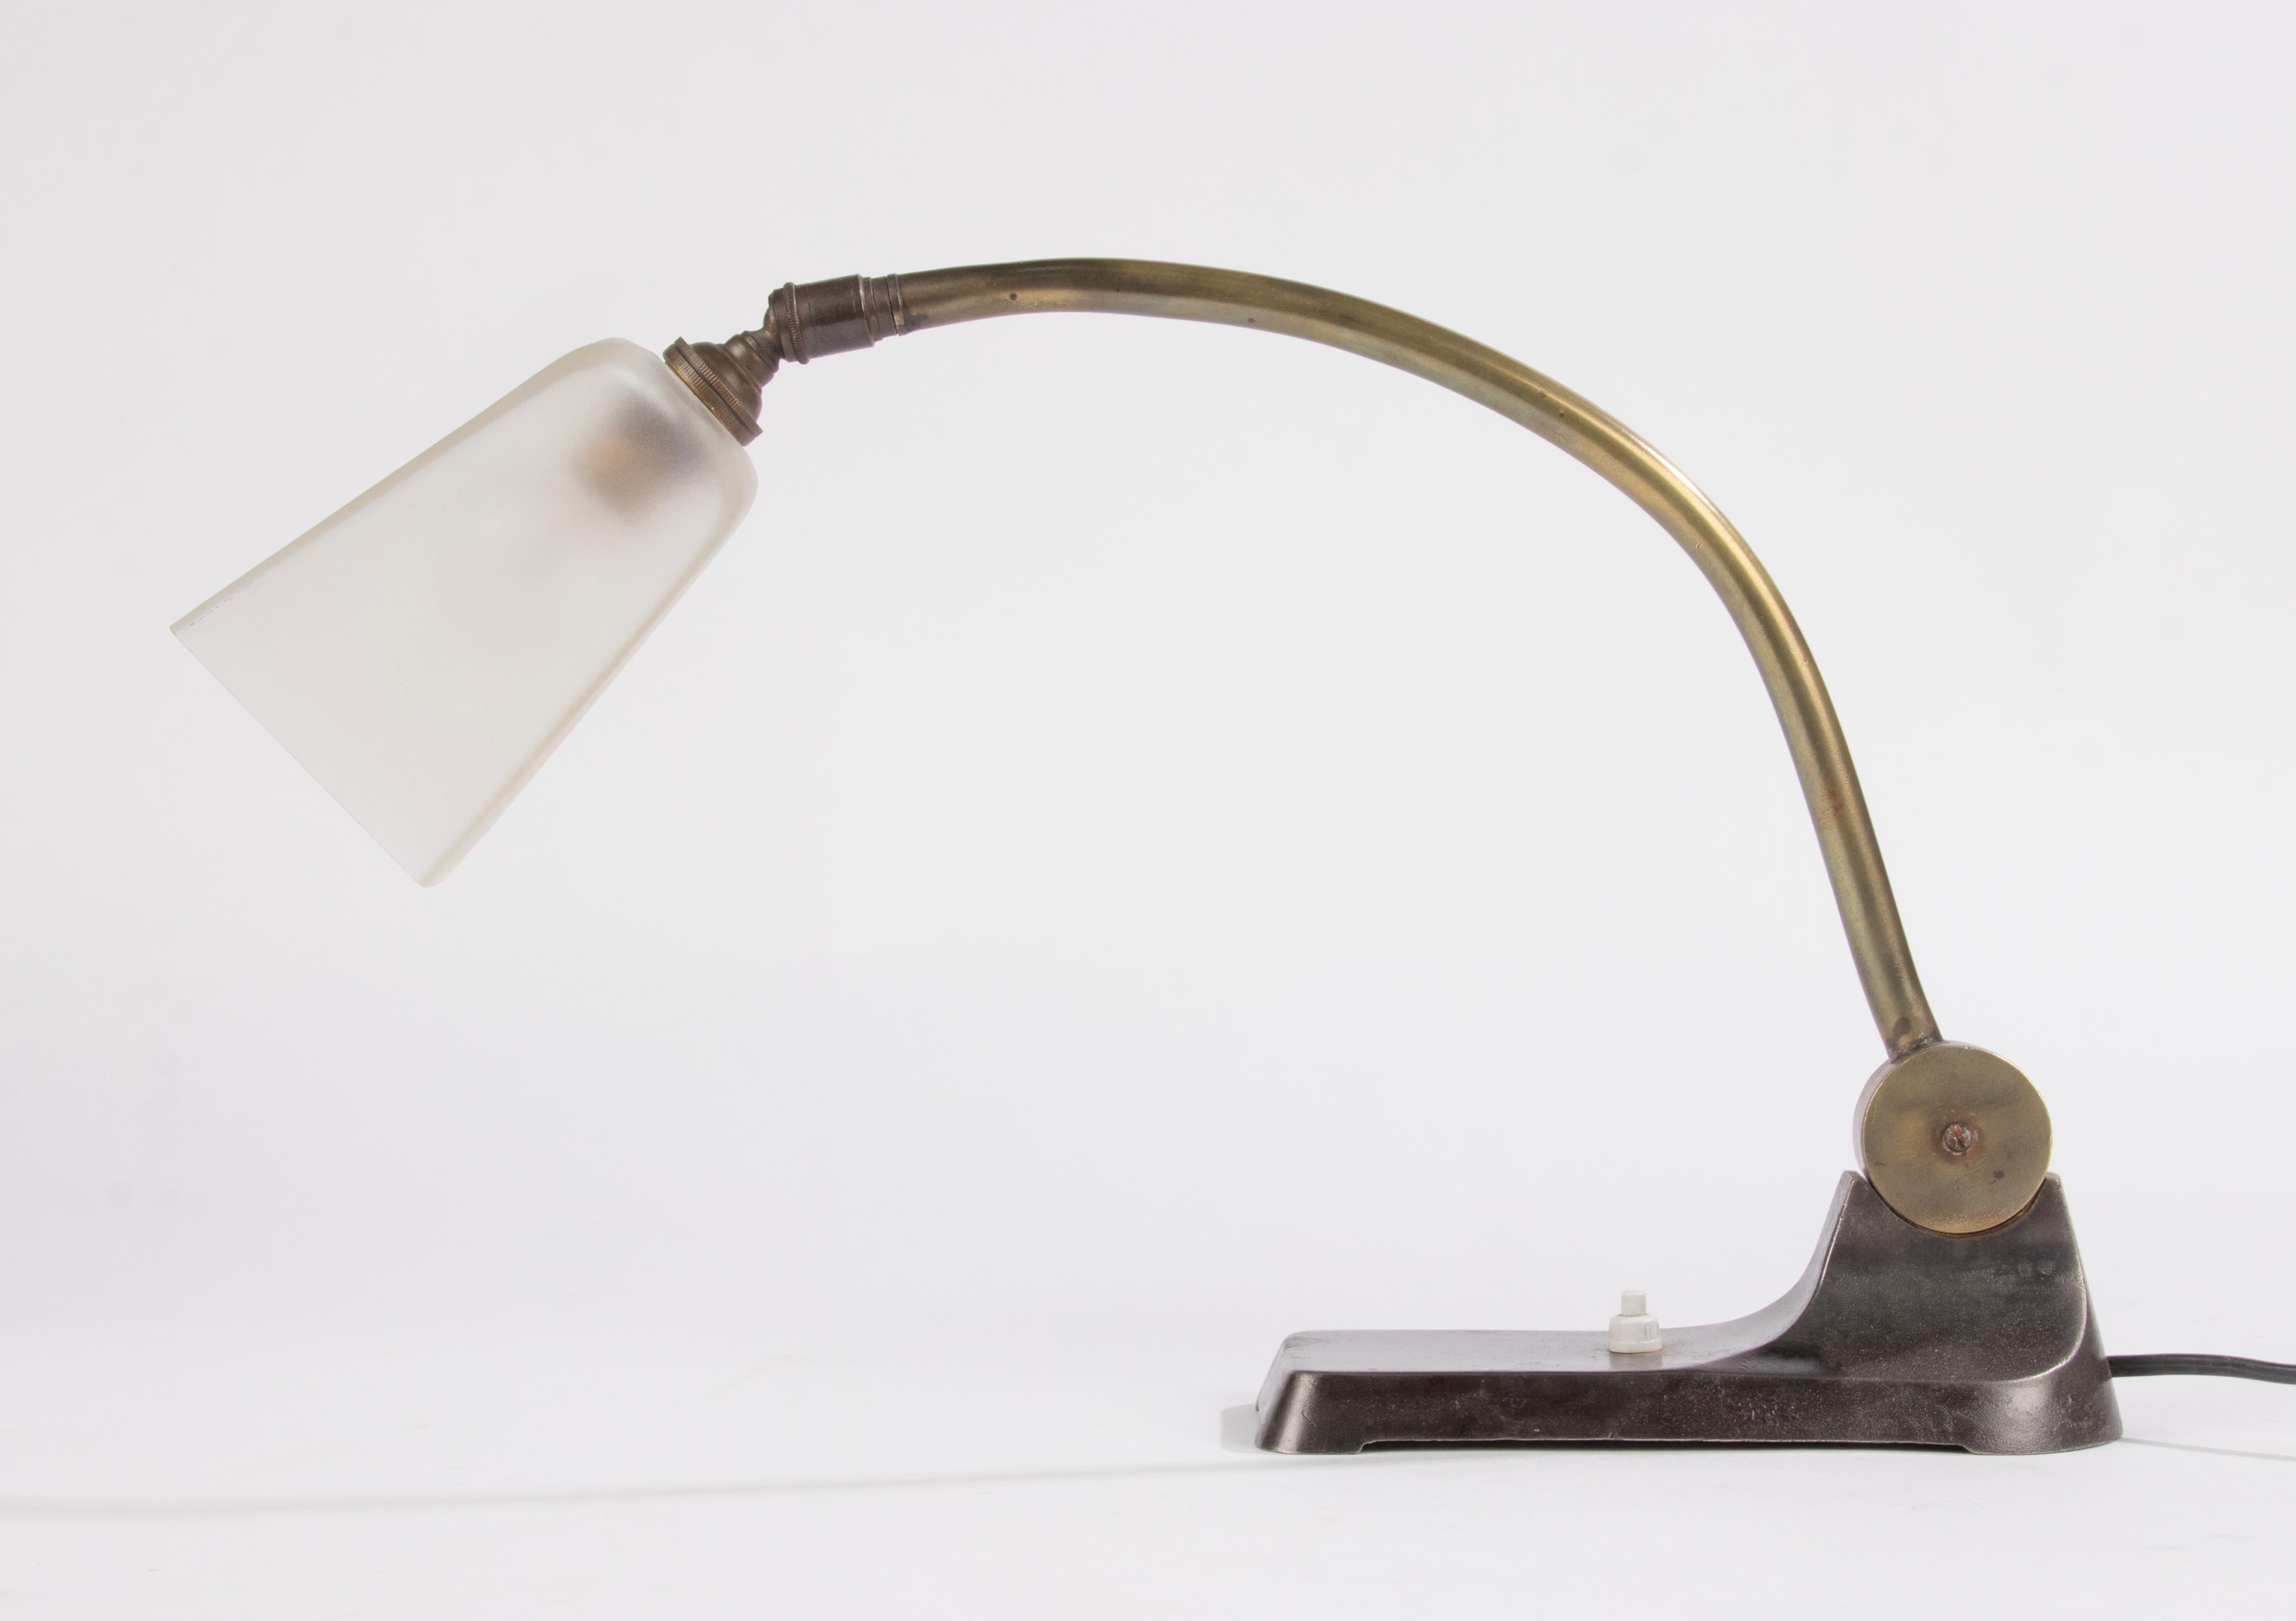 Beautiful Art Deco desk lamp in industrial style. The base is made of cast iron, the arm is made of bronze and is adjustable. The shade is made of sanitized glass. 
The lamp functions and in is in good condition, with a beautiful original patina.